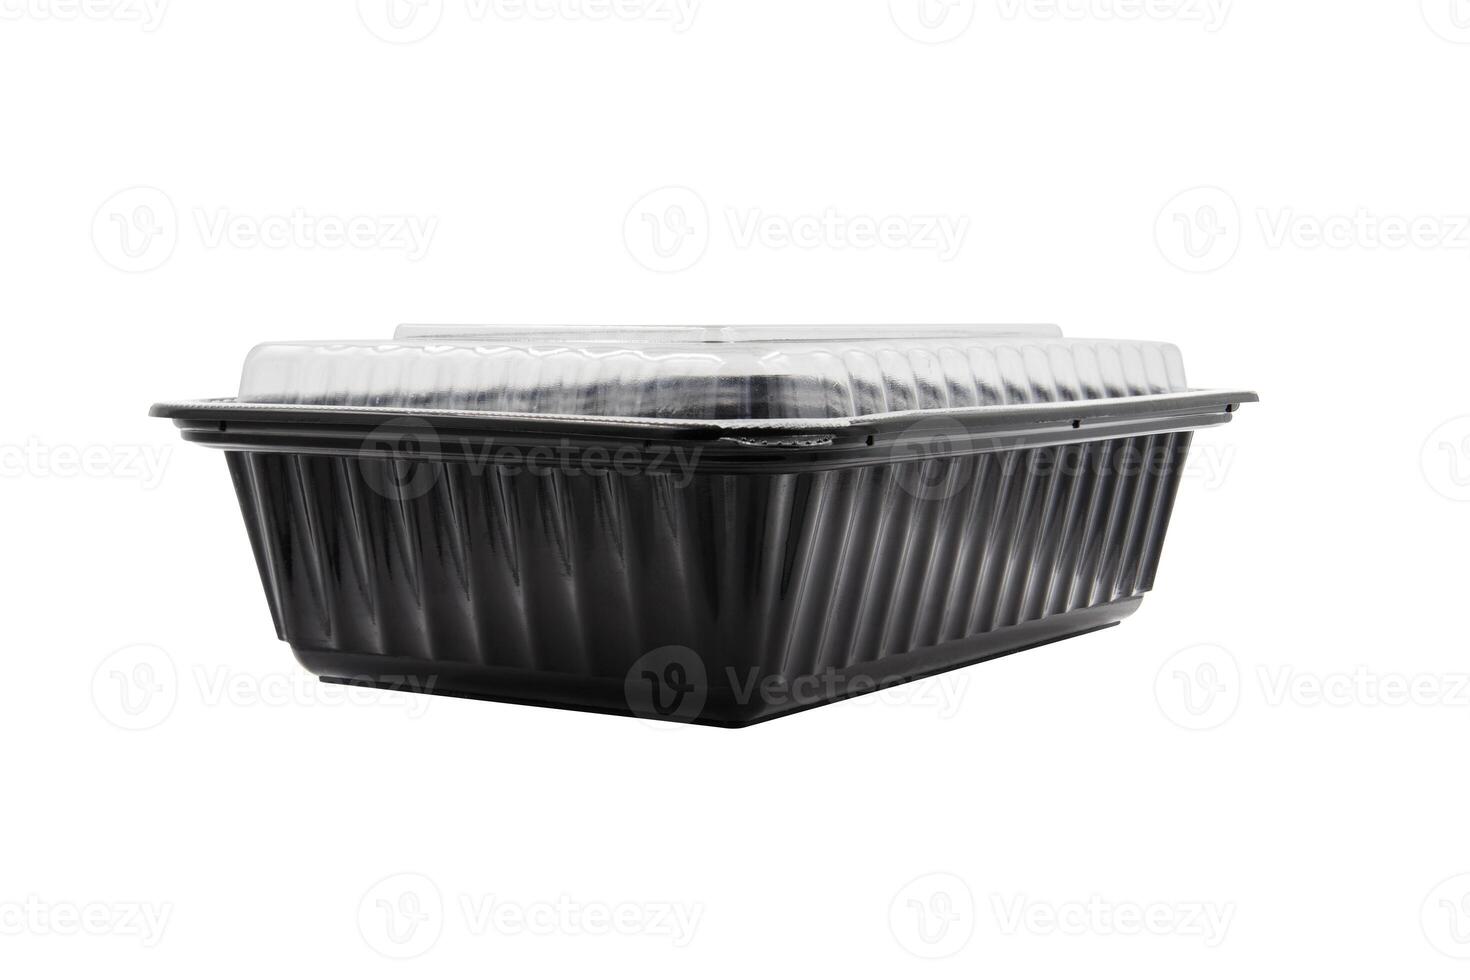 Plastic Food Packaging Tray With Clear Plastic Cover isolated on white background photo